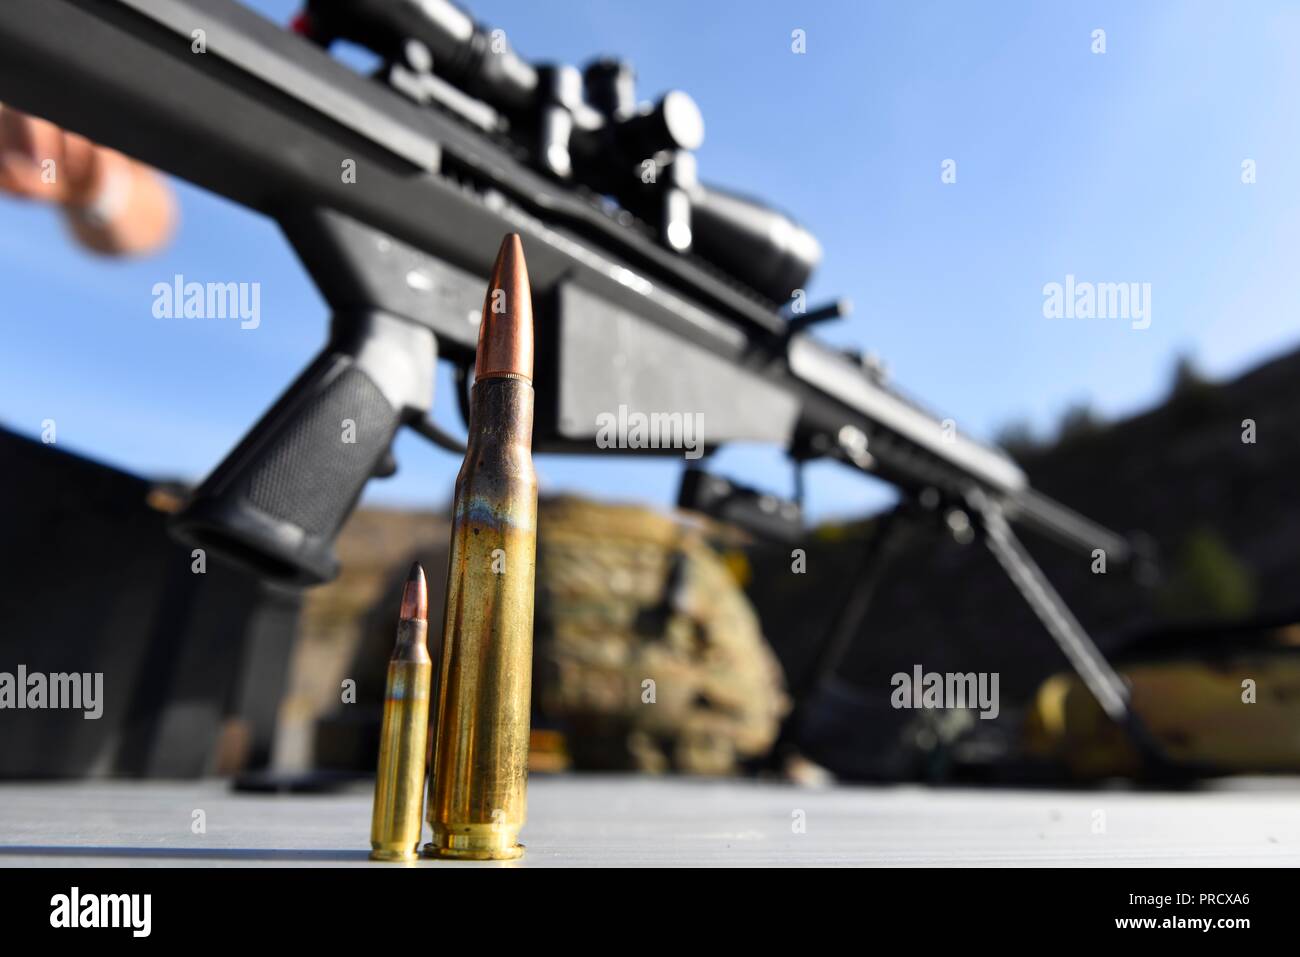 A .50-caliber bullet and a 7.62mm bullet rest in fron of a Barret M107 caliber rifle at Coulee Dam, Washington, Sept. 26, 2018. Airmen from the 92nd Civil Engineer Squadron explosive ordinance team underwent familiarization training with the Barret M107 caliber rifle as part of their annual weapons qualification. (U.S. Air Force photo/Airman 1st Class Lawrence Sena) Stock Photo